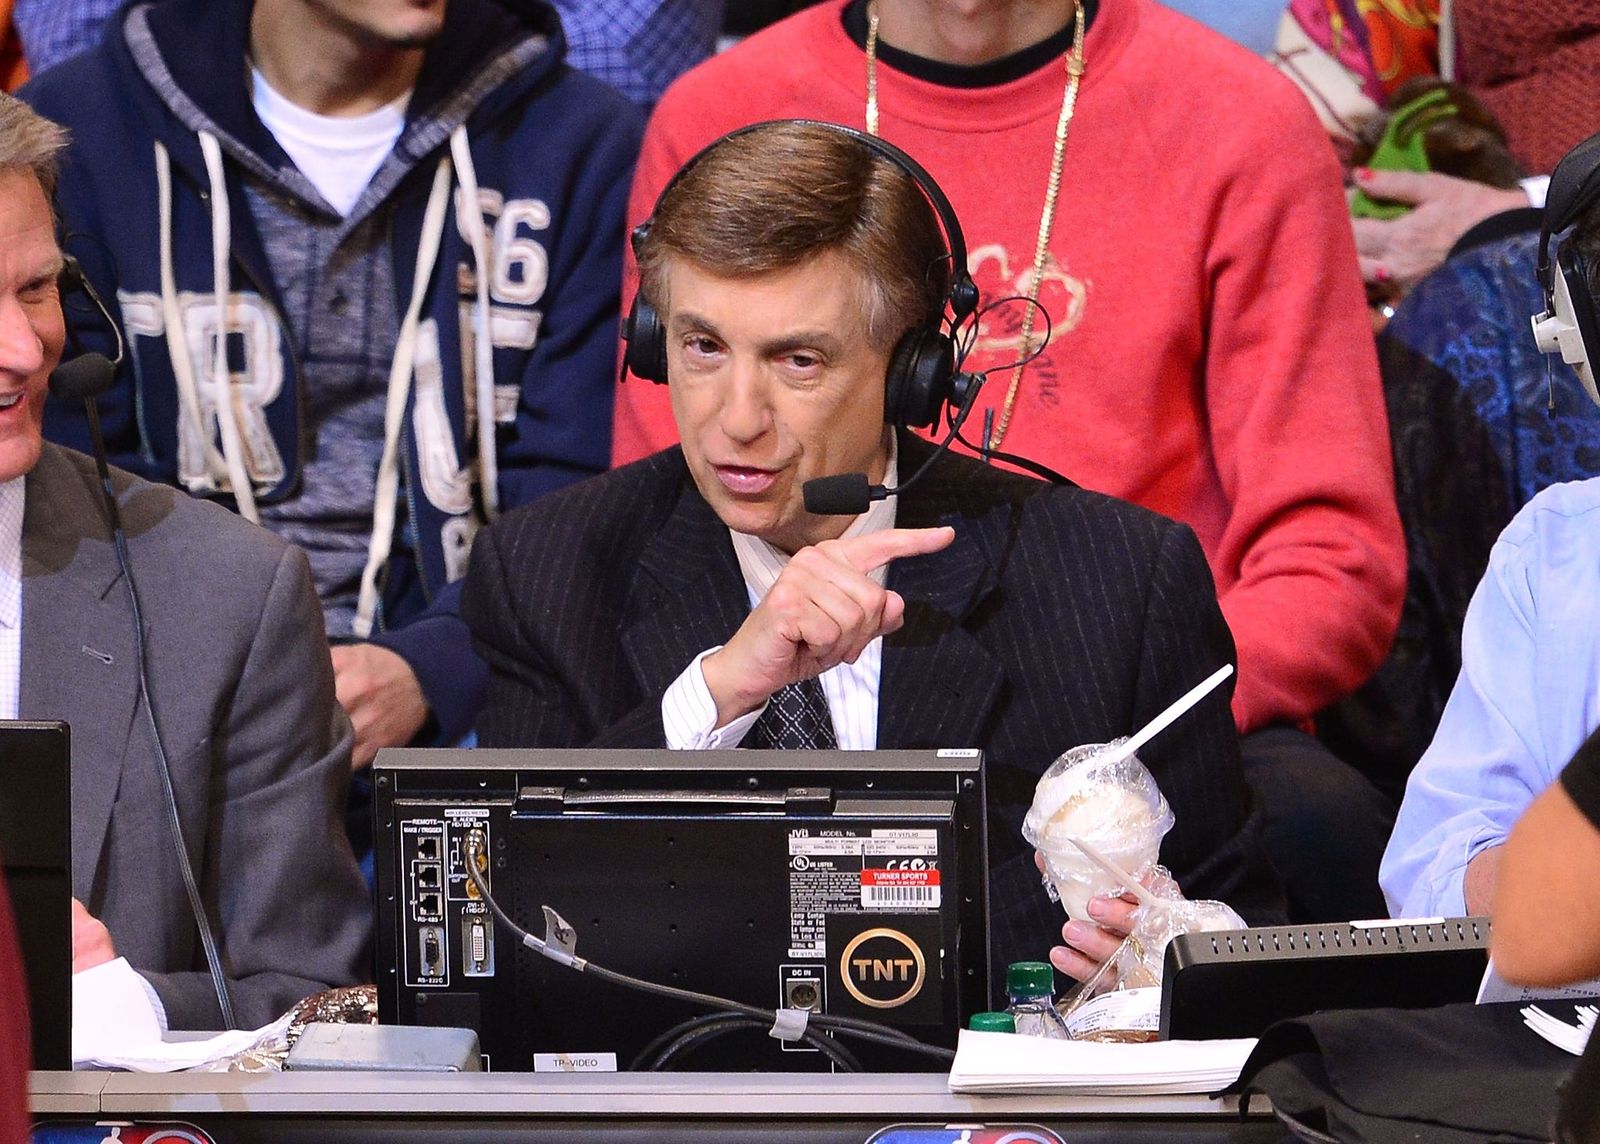 Marv Albert at the New York Knicks vs Brooklyn Nets game on December 5, 2013, in New York City | Photo: James Devaney/WireImage/Getty Images